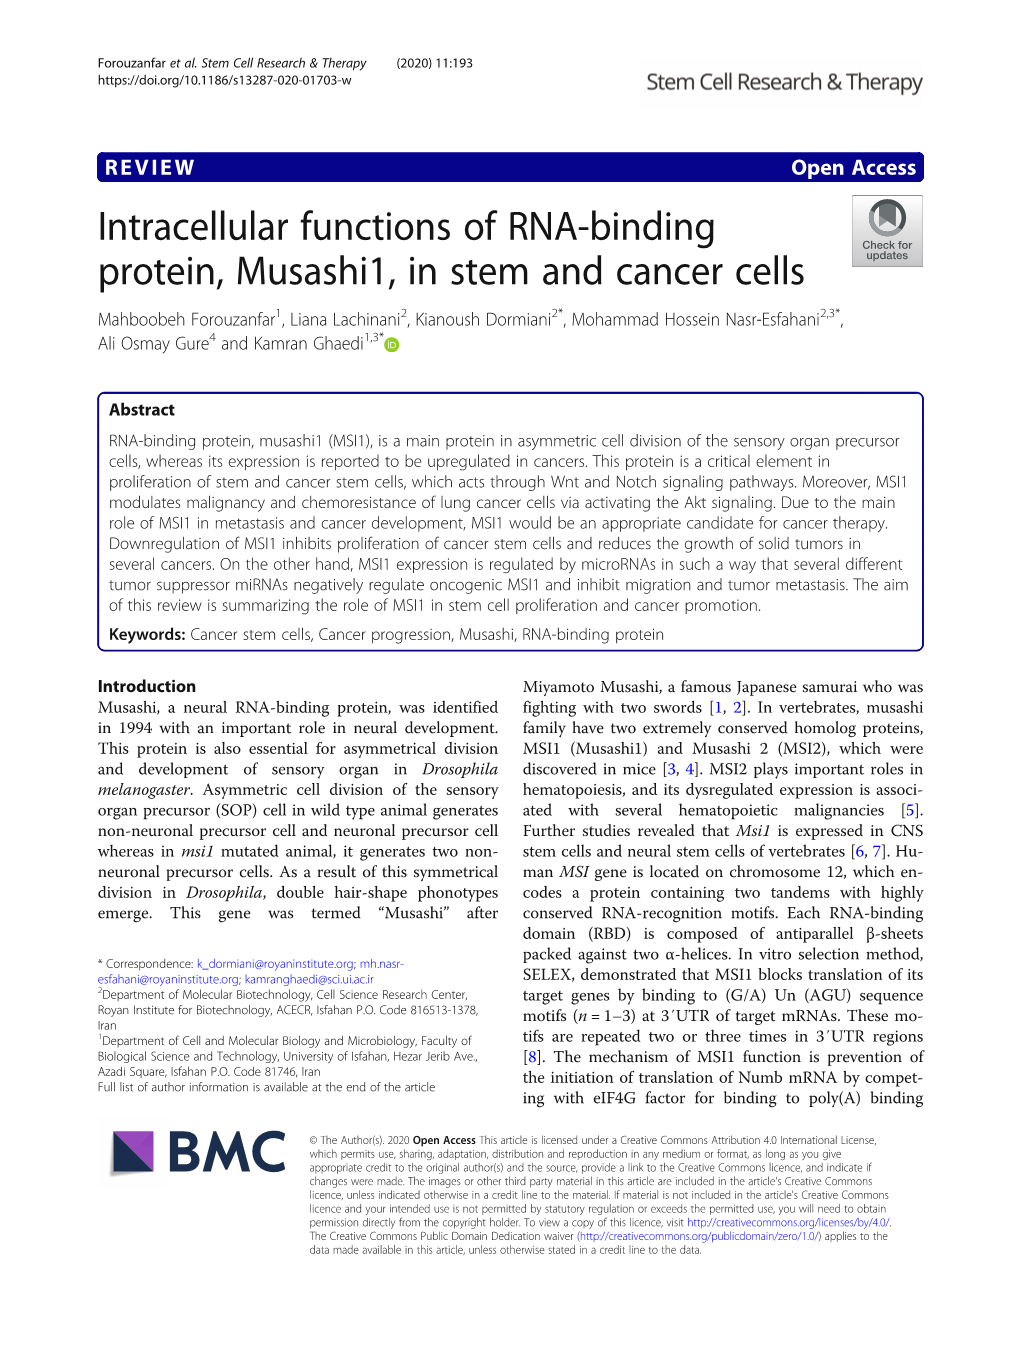 Intracellular Functions of RNA-Binding Protein, Musashi1, in Stem and Cancer Cells